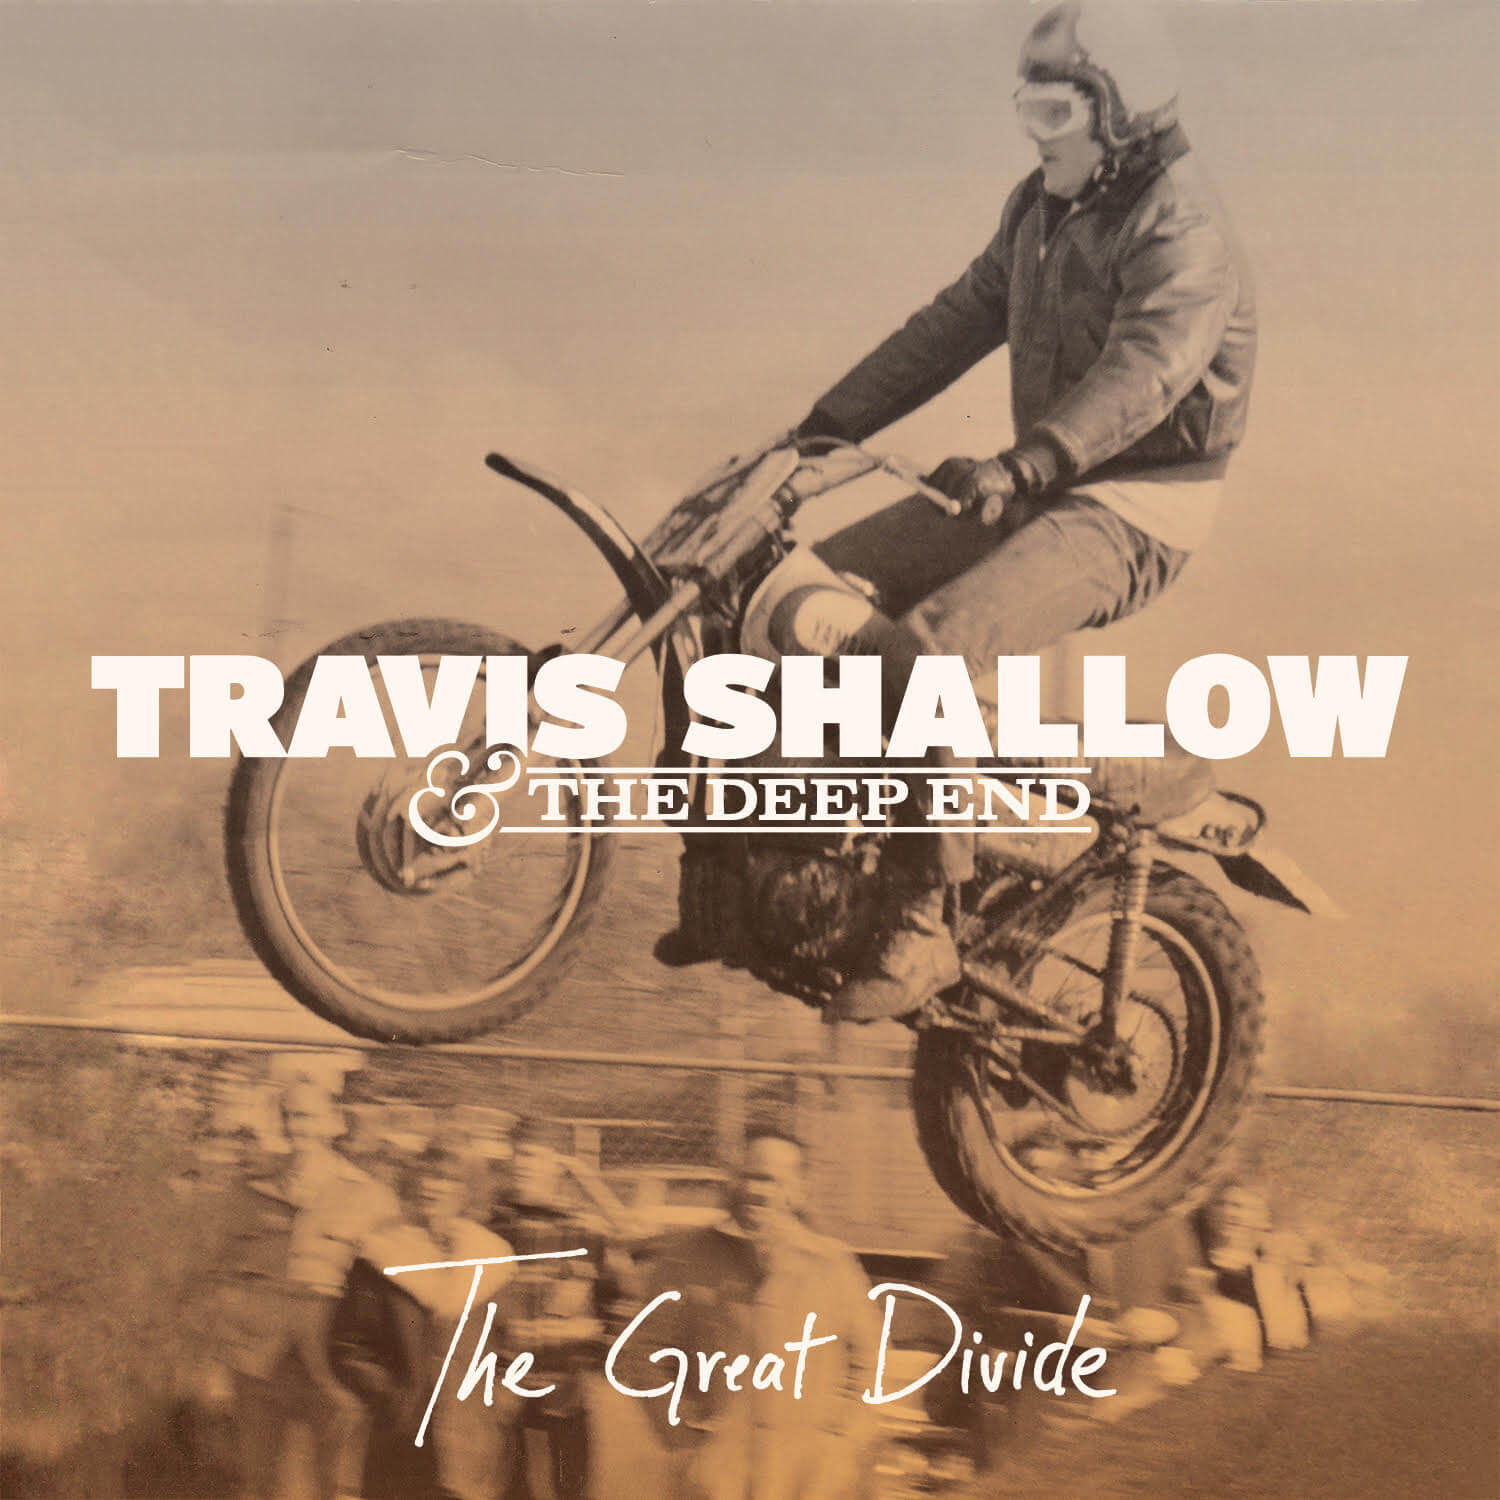 Travis Shallow & The Deep Ends superbly crafted soulful Americana